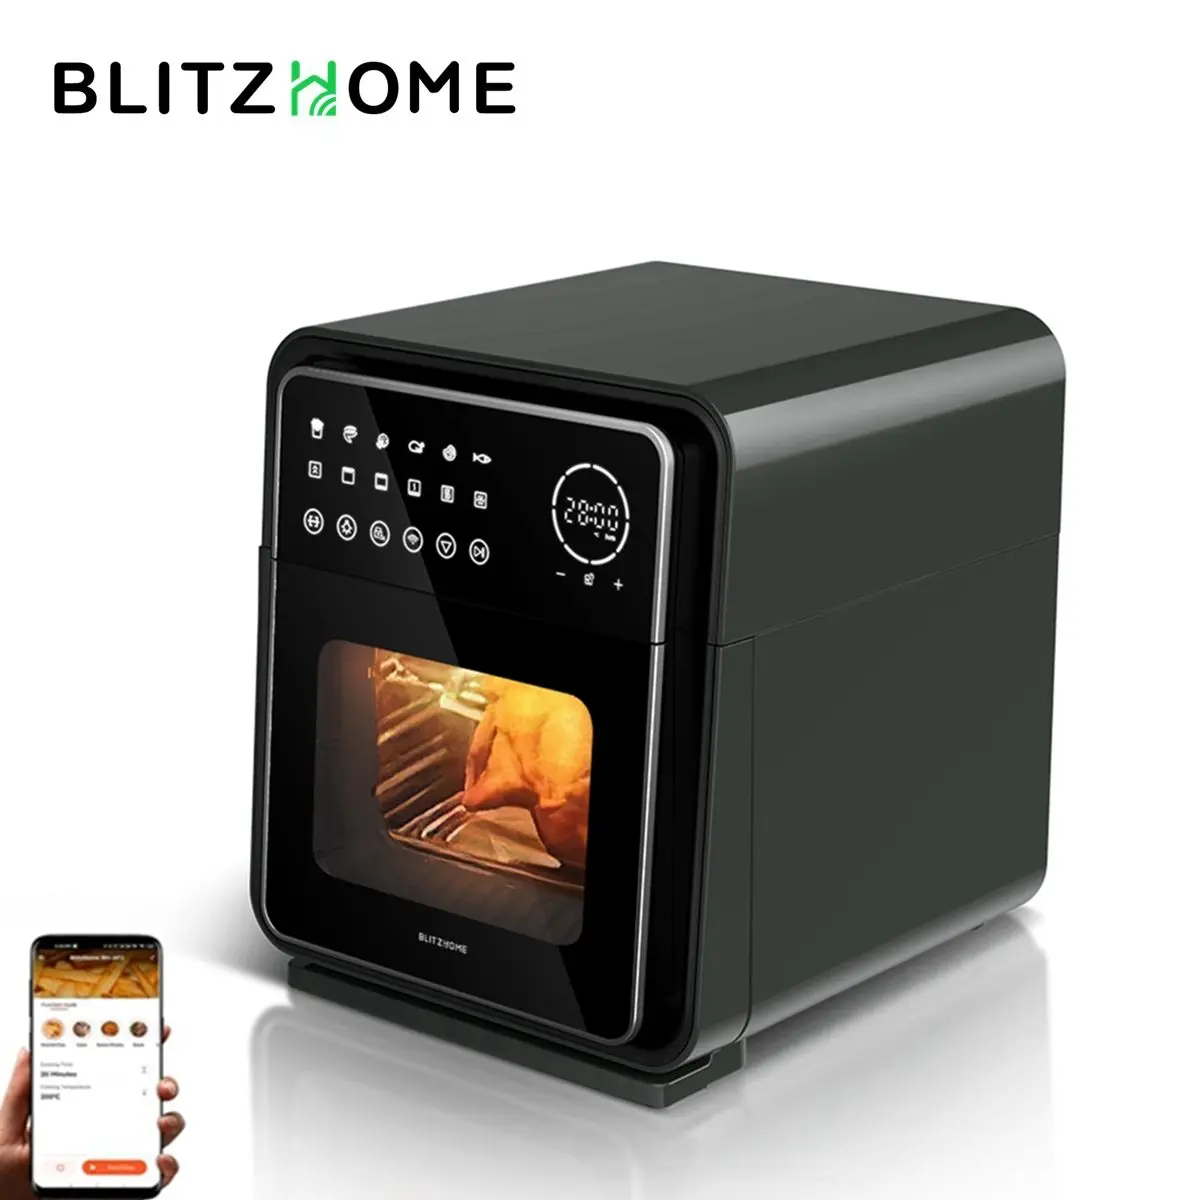 

BlitzHome 12L 13QT Electric Air Fryer Oven Toaster Rotisserie Dehydrator LED Touchscreen Large Capacity Chicken Frying Machine